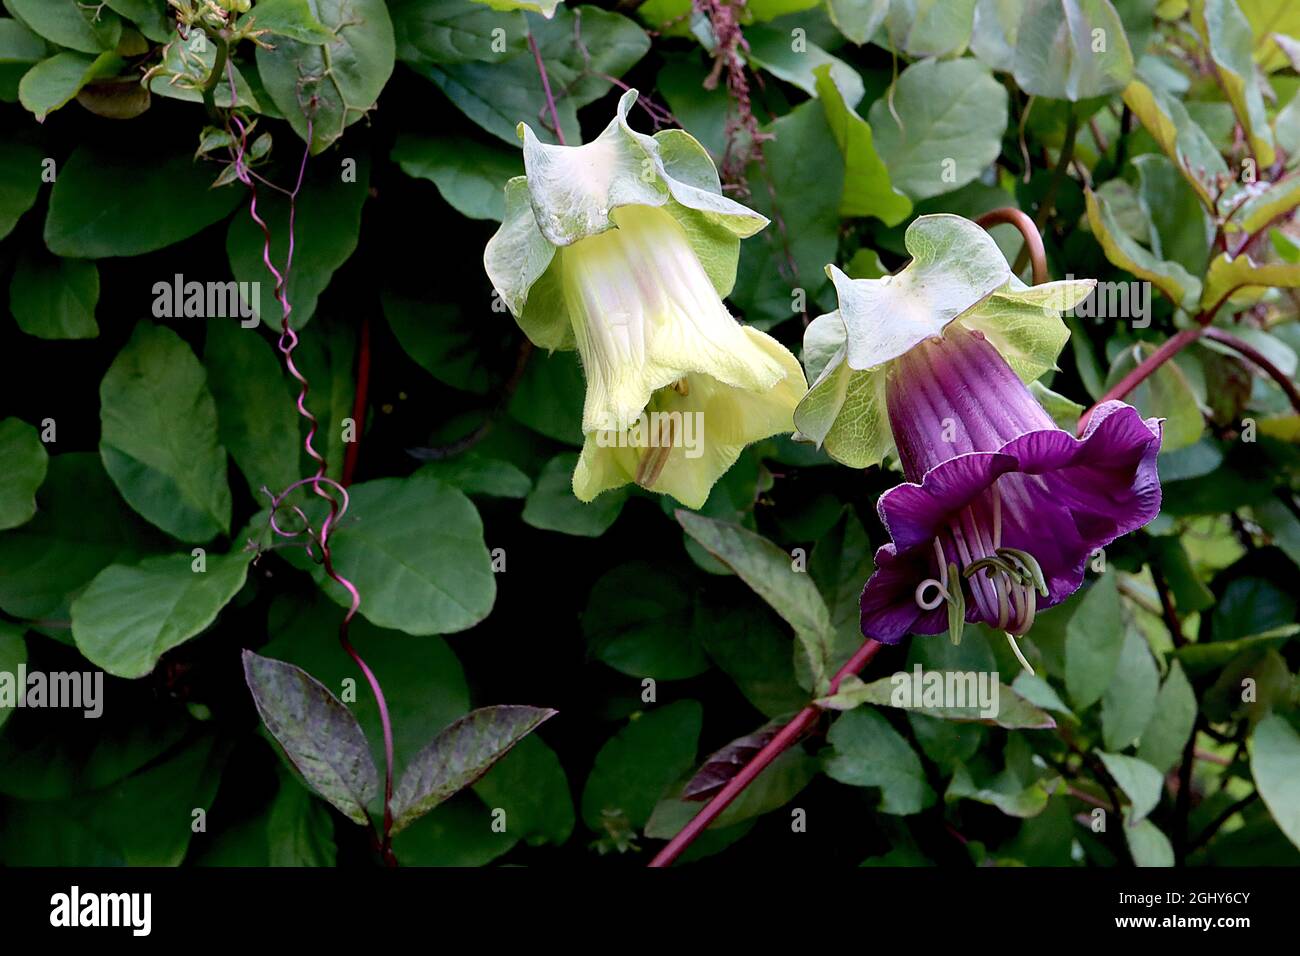 Cobaea scandens ‘Purple’ and ‘White’ cup and saucer vine – large purple and cream bell-shaped flowers with wavy pale green sepals,  August, England,UK Stock Photo